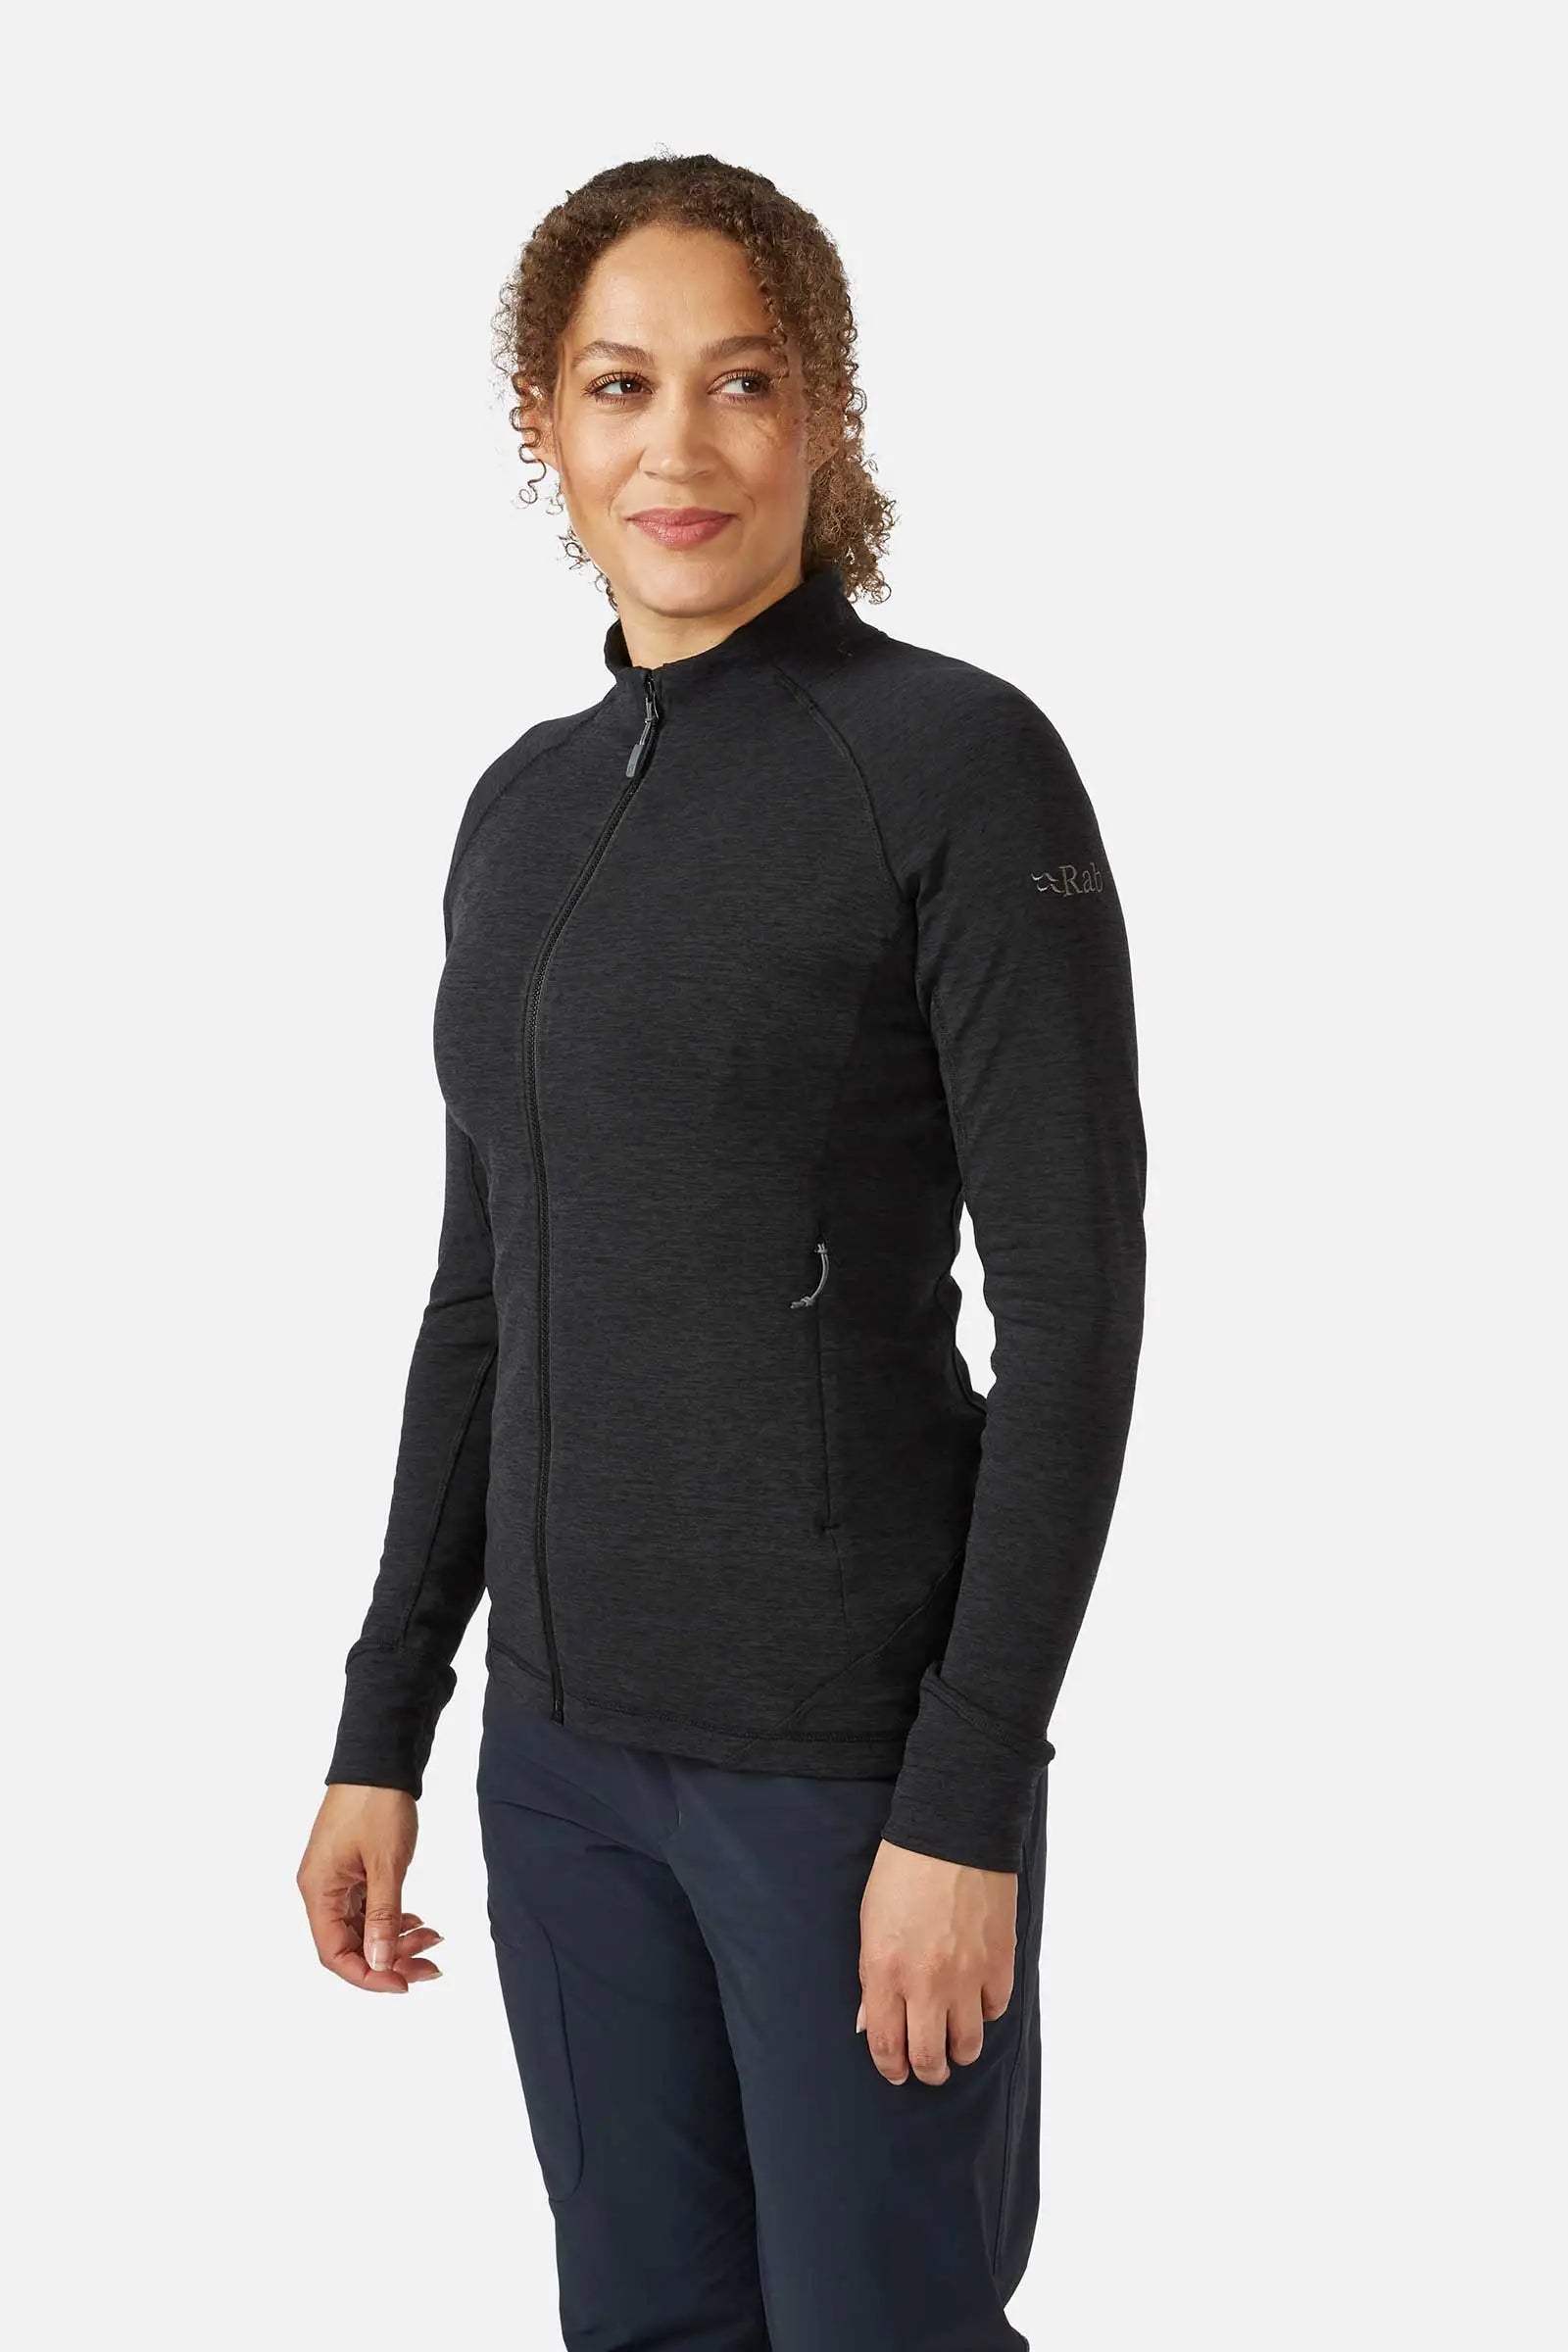 Women's Nexus Jacket by RAB - The Luxury Promotional Gifts Company Limited